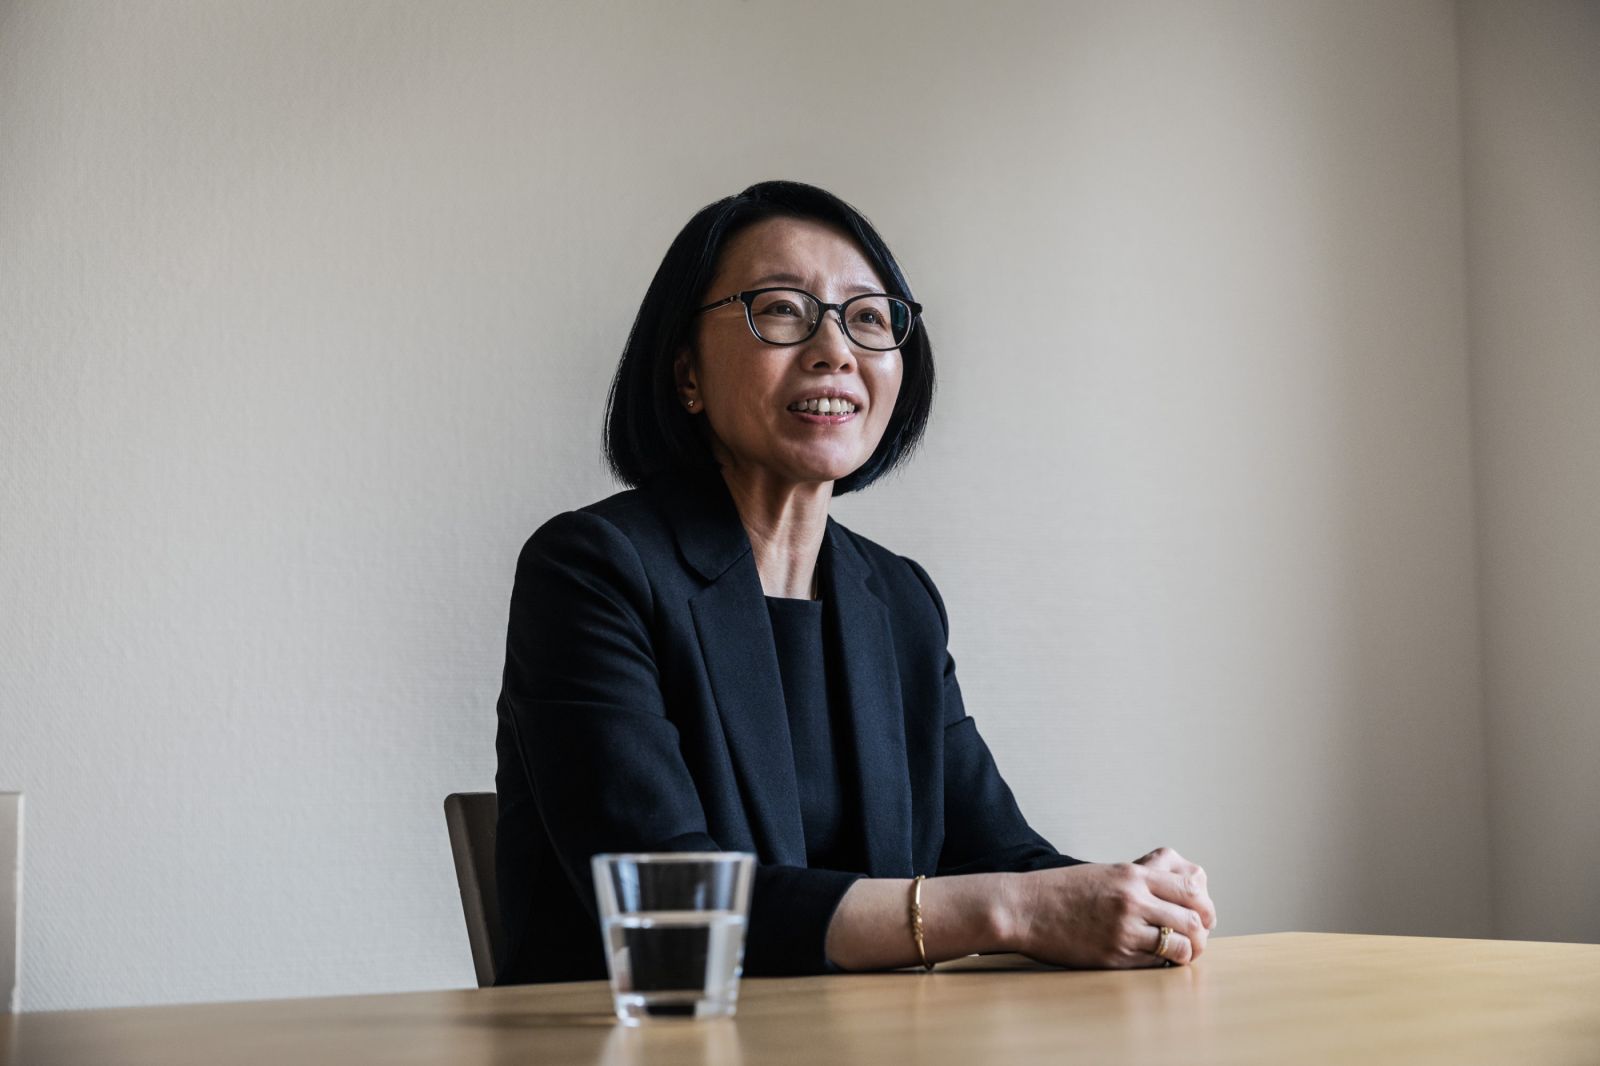 Tracy Hakala photographed at Vahterus Head Office in Kalanti, Finland in April 2018.